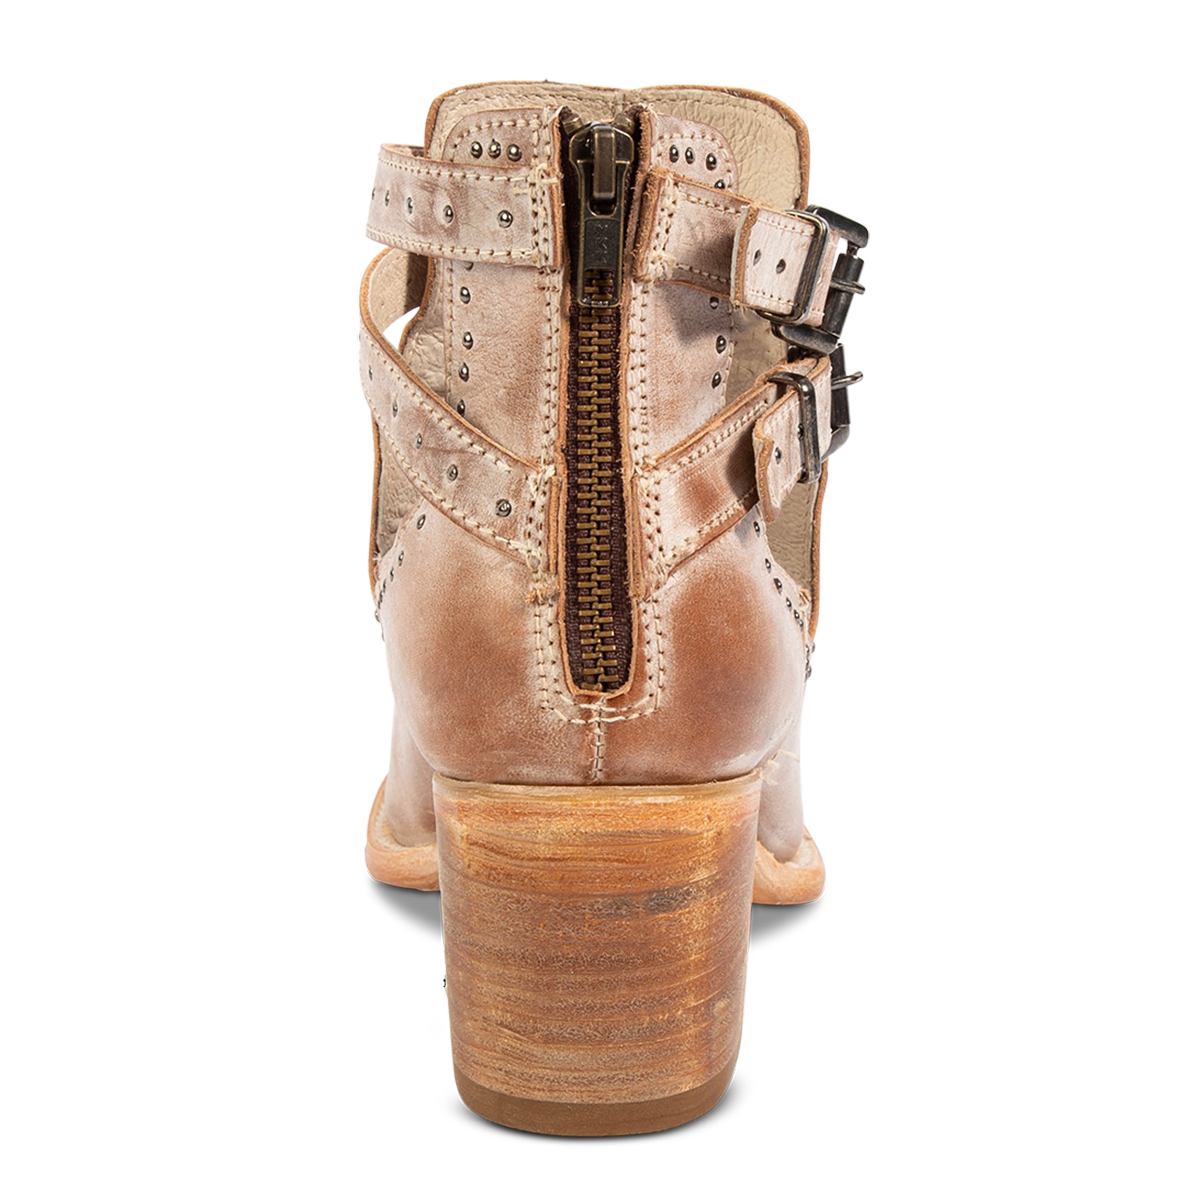 Back view showing an inside working brass zipper, adjustable leather straps and block heel on FREEBIRD women's Cosmic taupe leather sandal